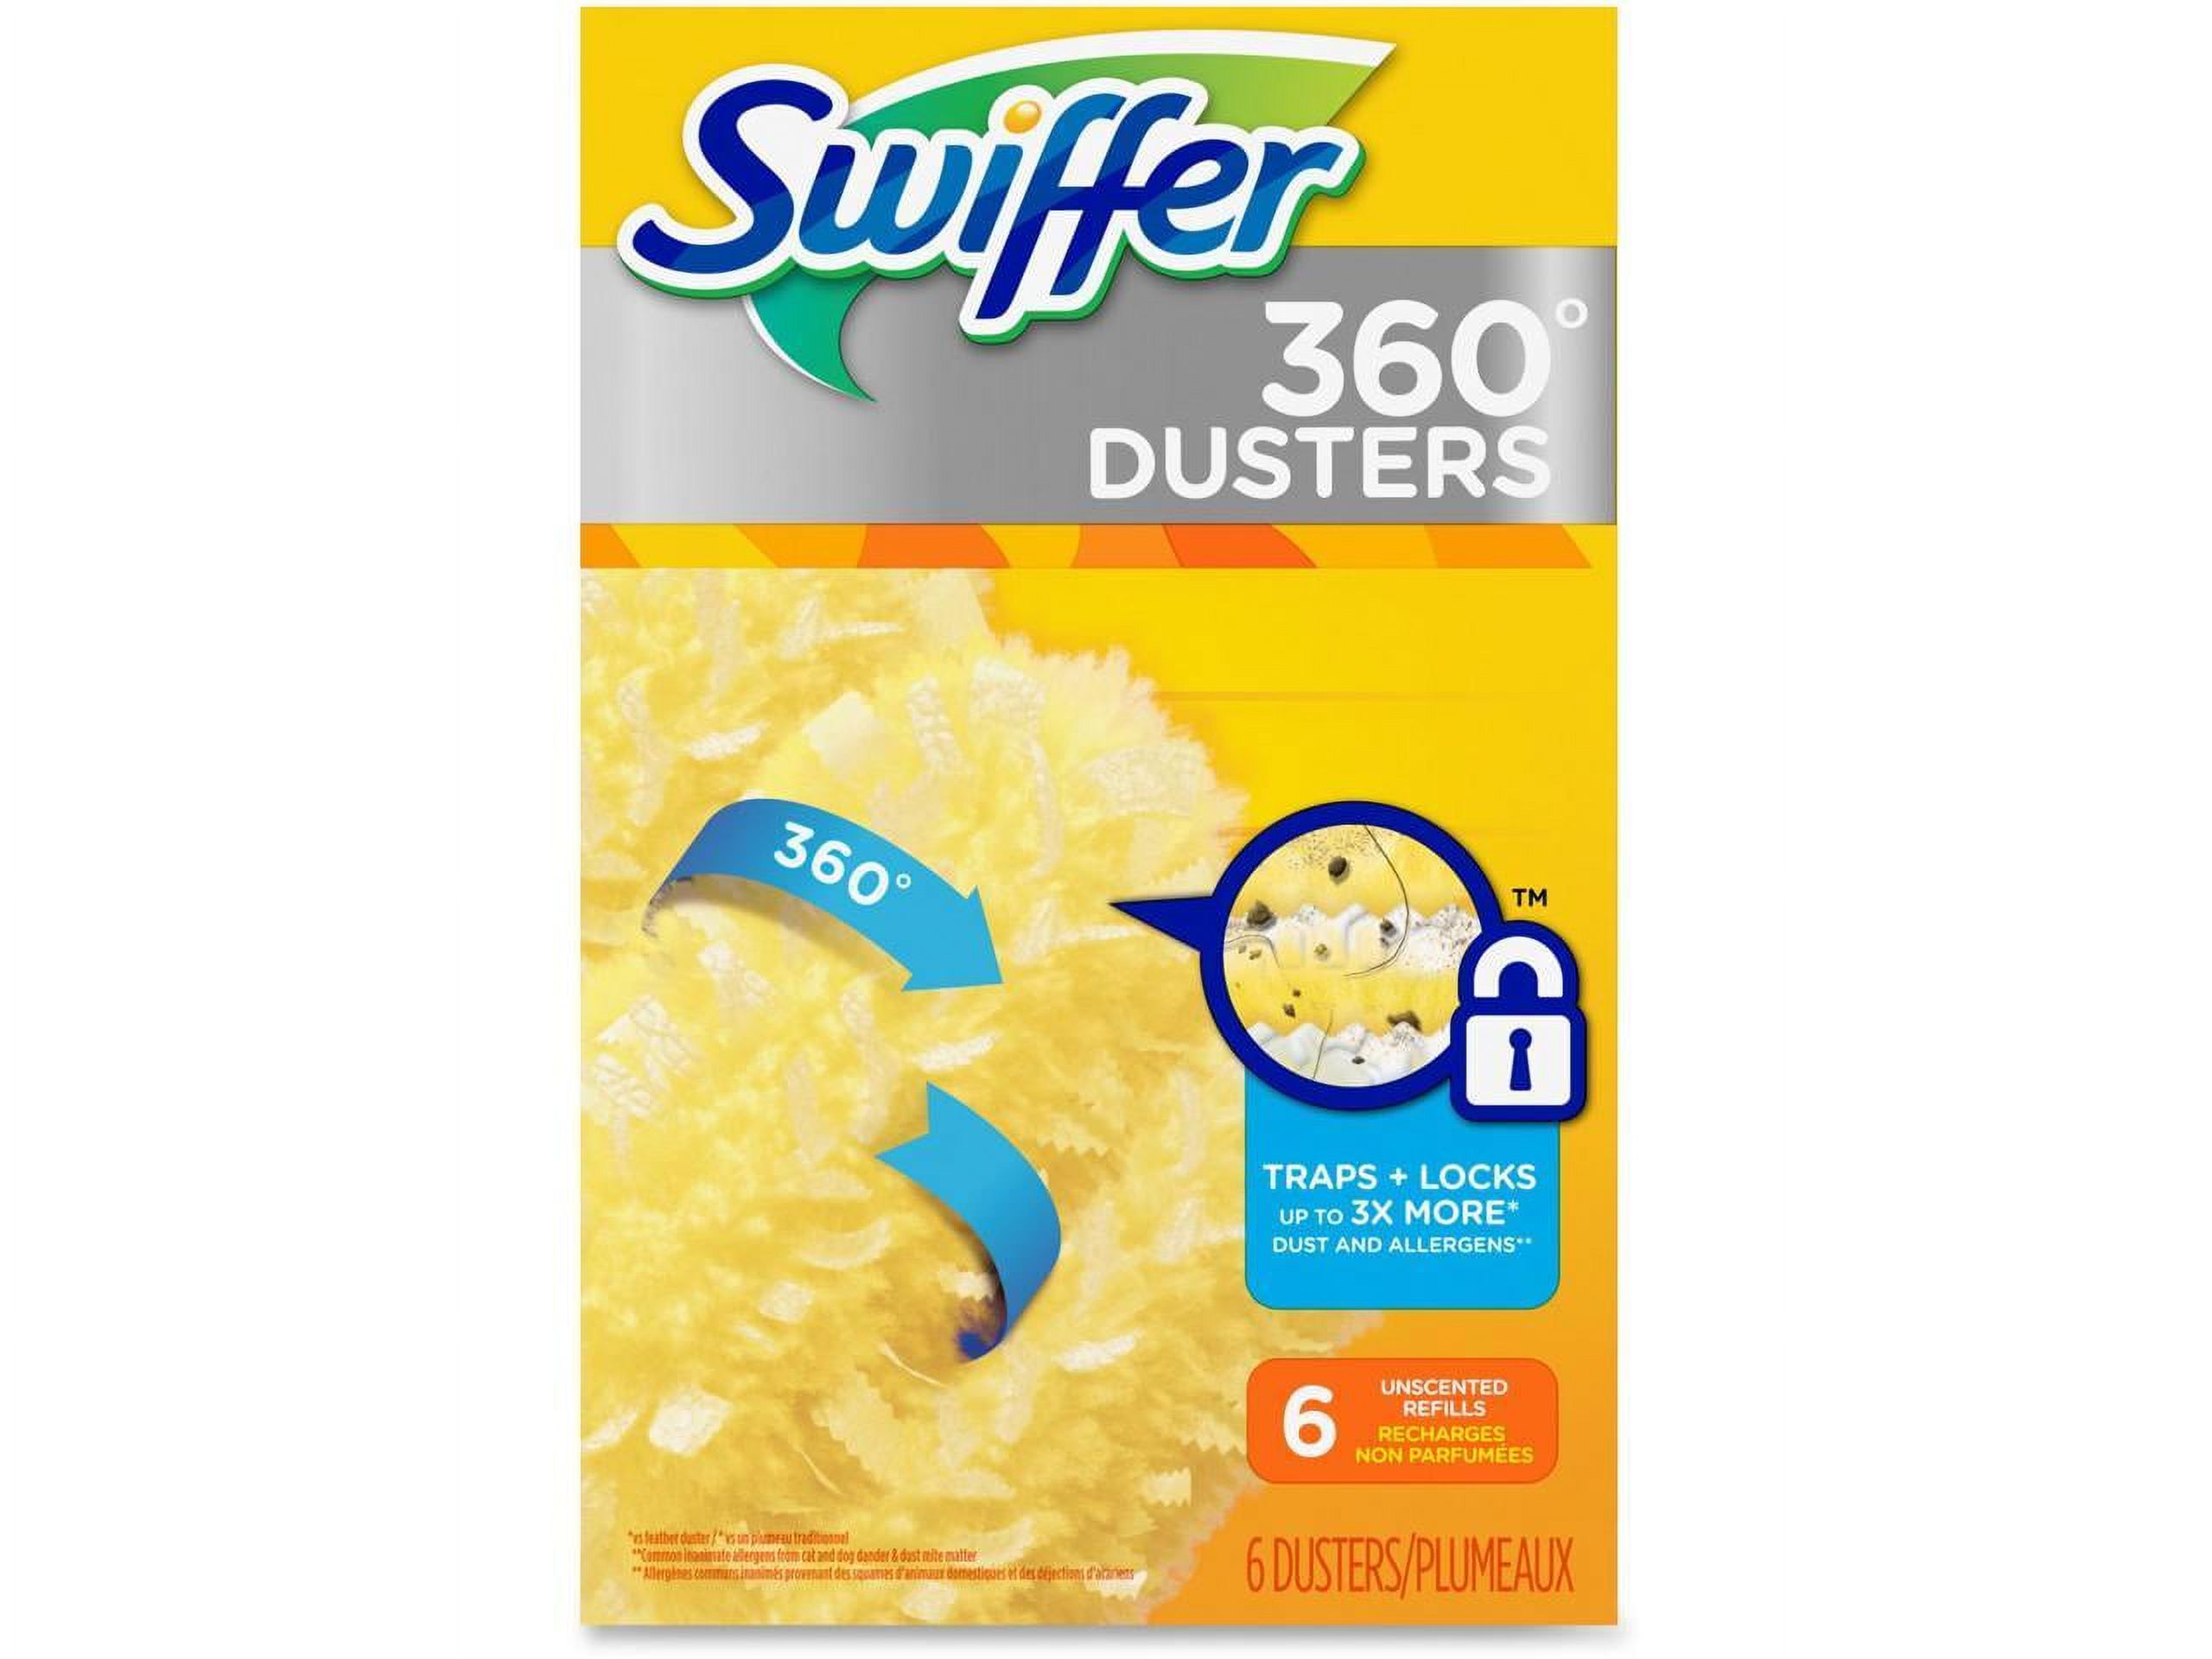 Swiffer Heavy Duty Duster, Refills, 6 Count, Yellow, Unscented - image 3 of 9